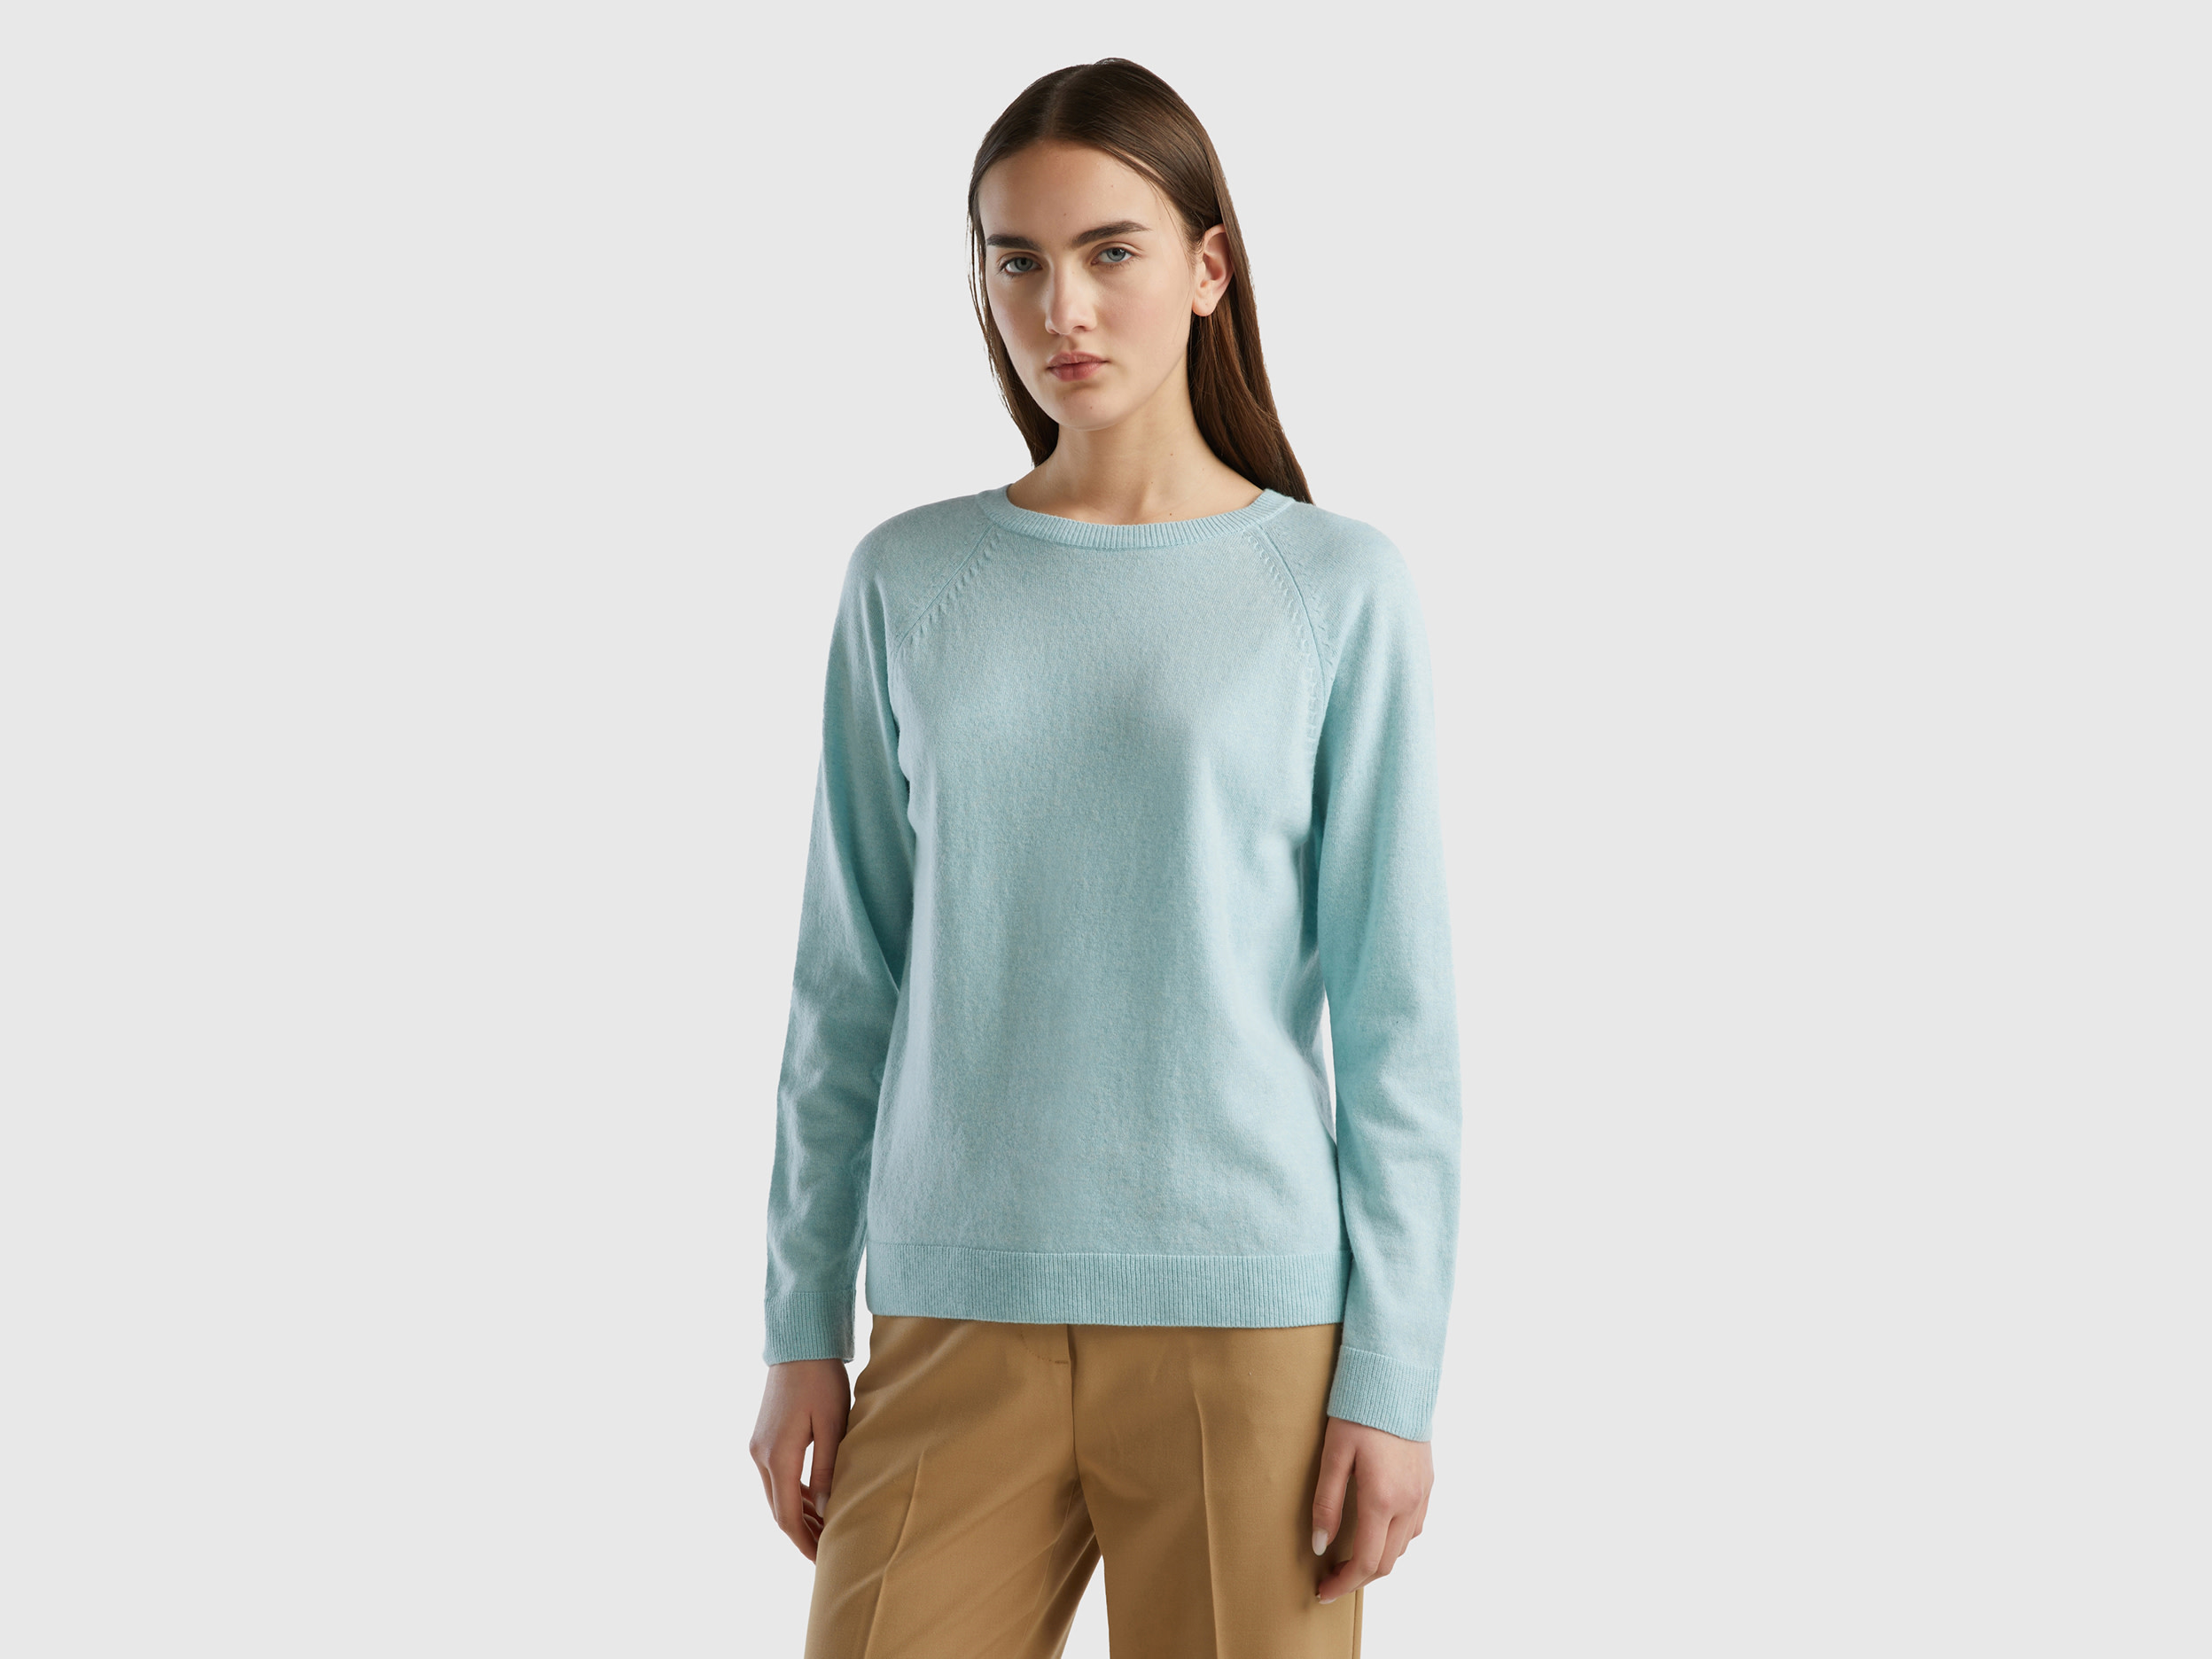 Benetton, Light Gray Crew Neck Sweater In Cashmere And Wool Blend, size XL, Light Gray, Women